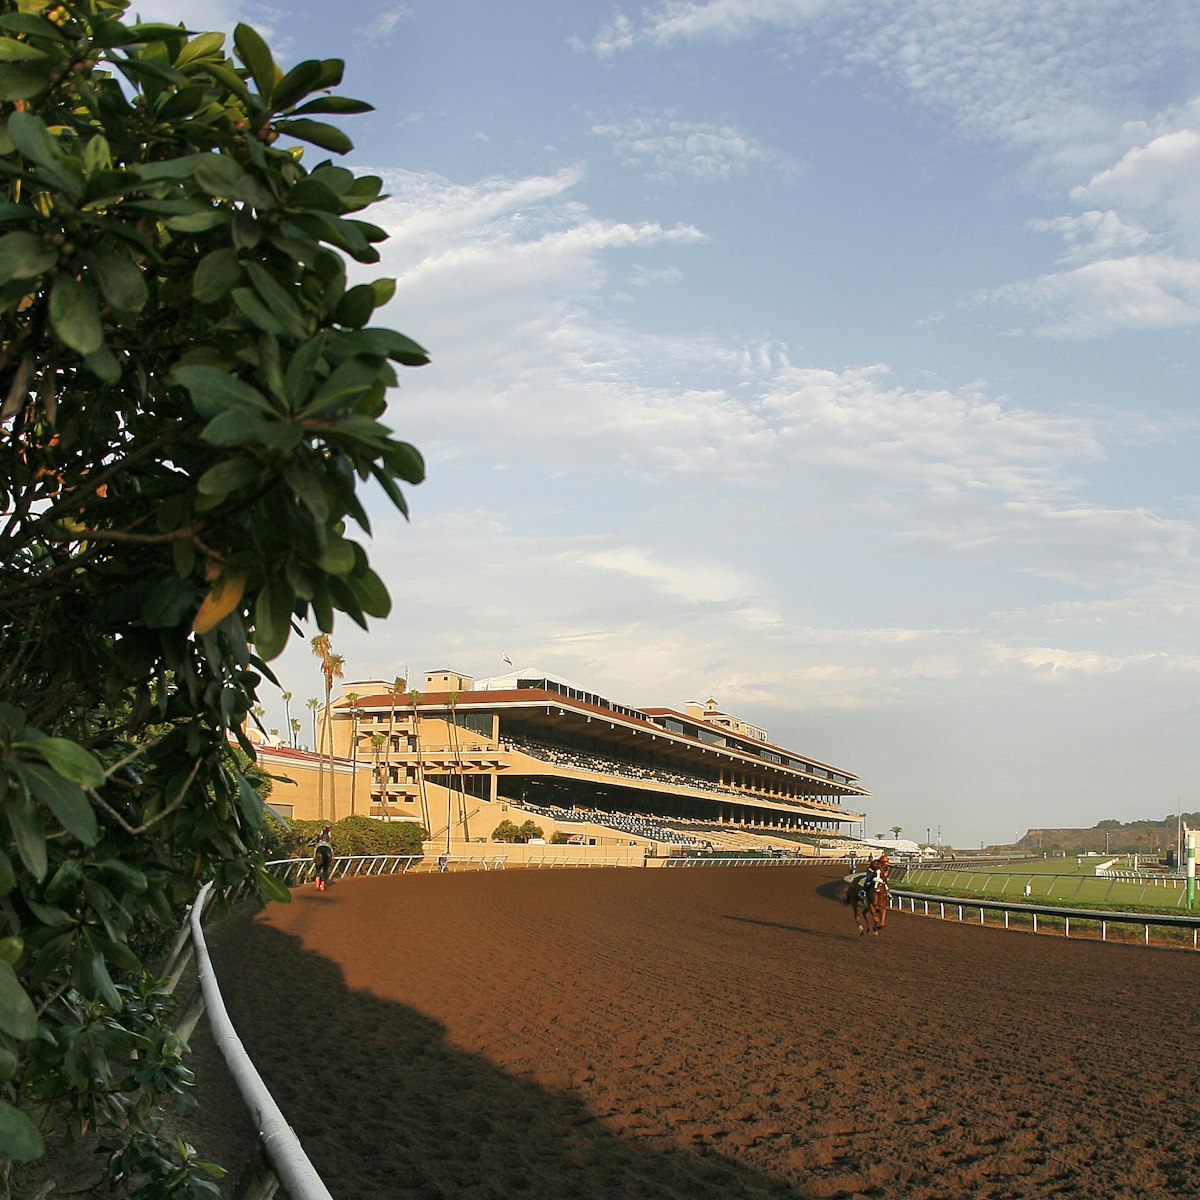 DEL MAR, CA - July 16, 2006:  Horse gallops in front of the Del Mar Race Track grandstand. July 16, 2006 (Photo by Horsephotos /Getty Images)